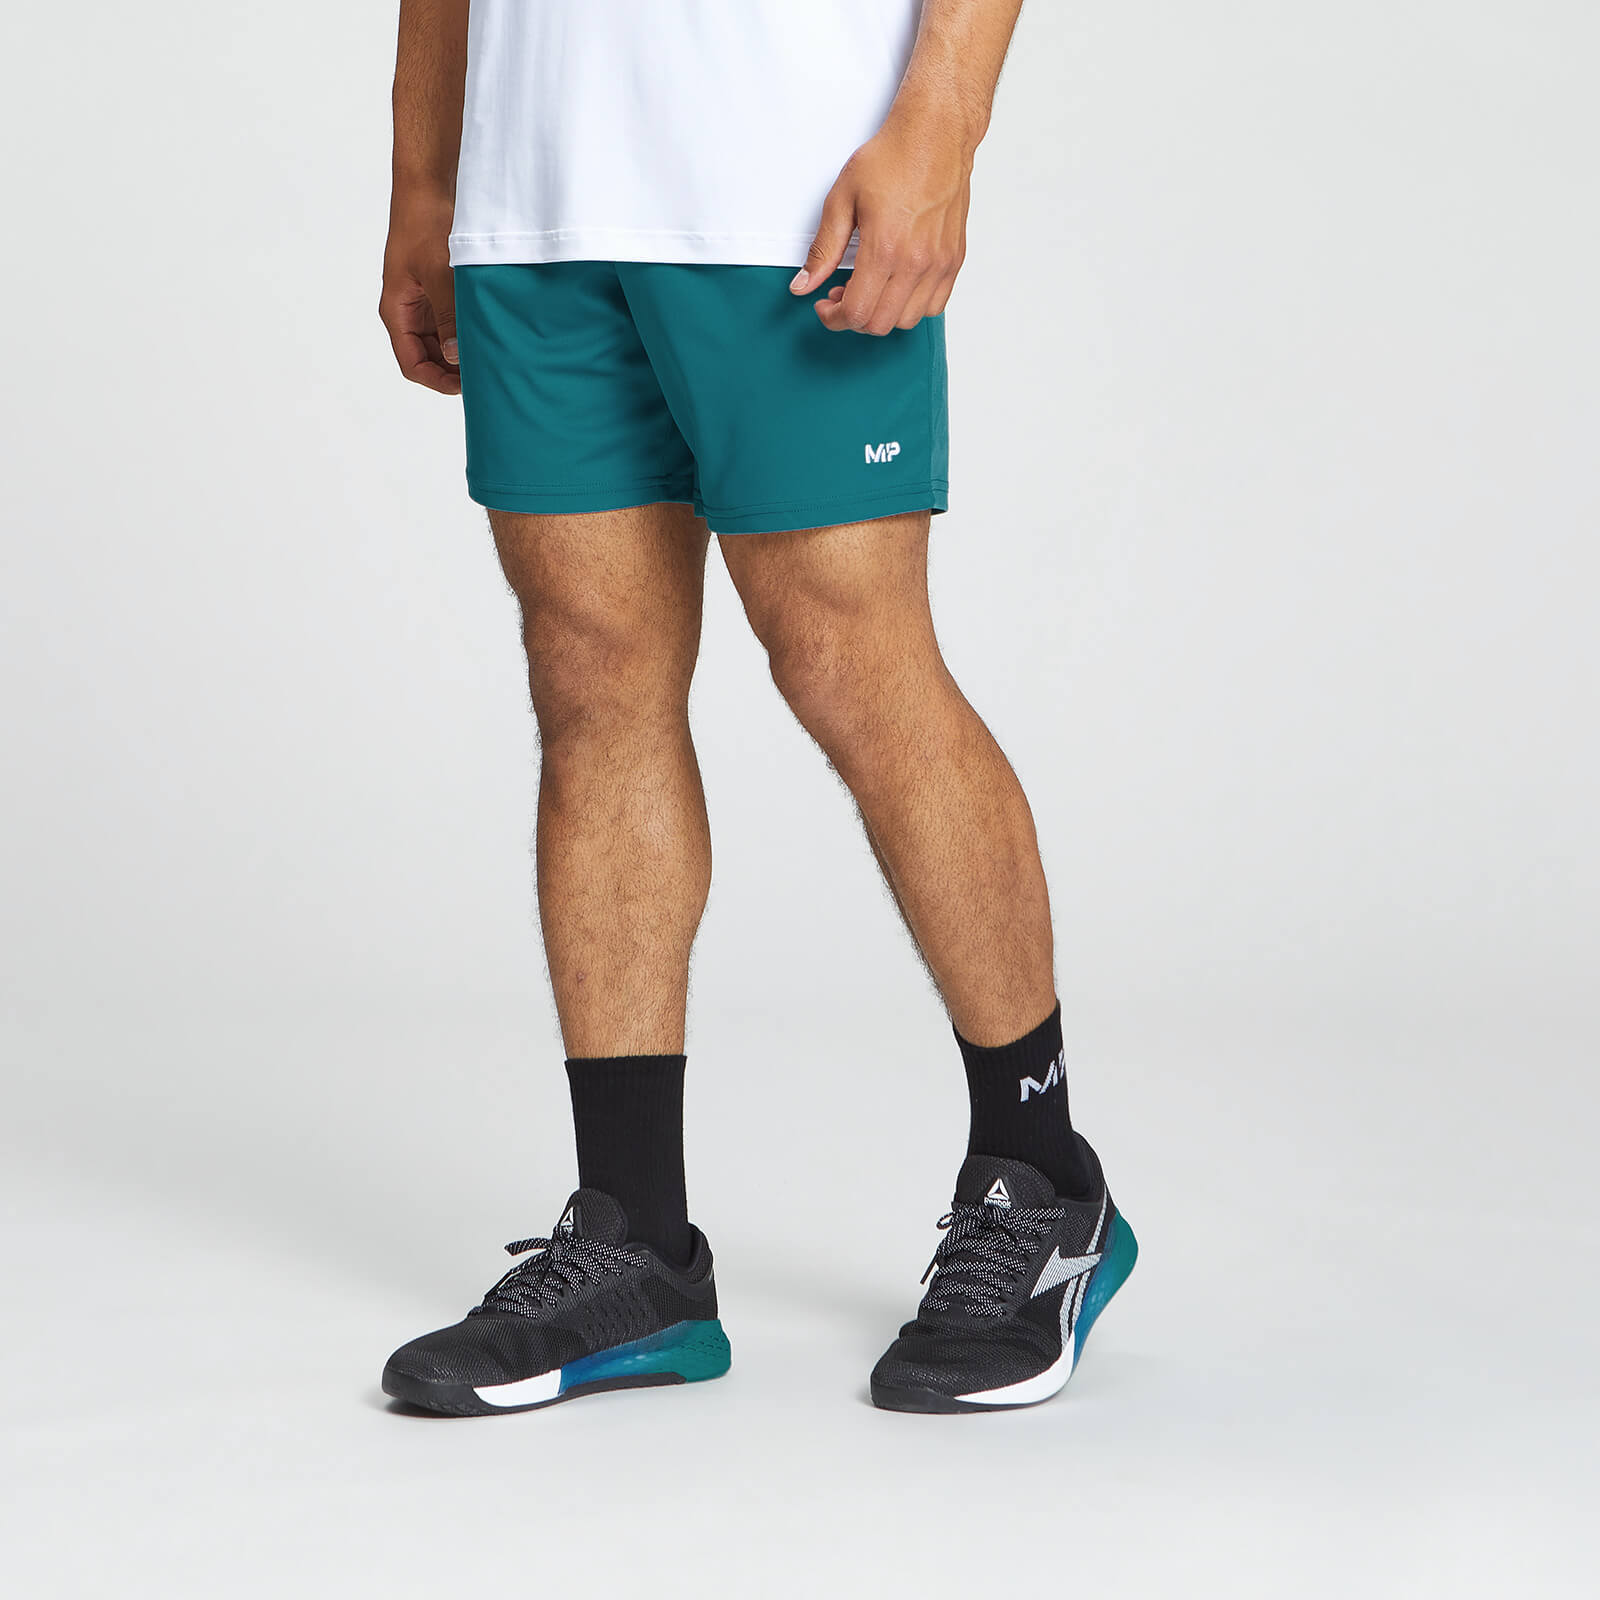 MP Men's Lightweight Training Shorts - Teal - M product